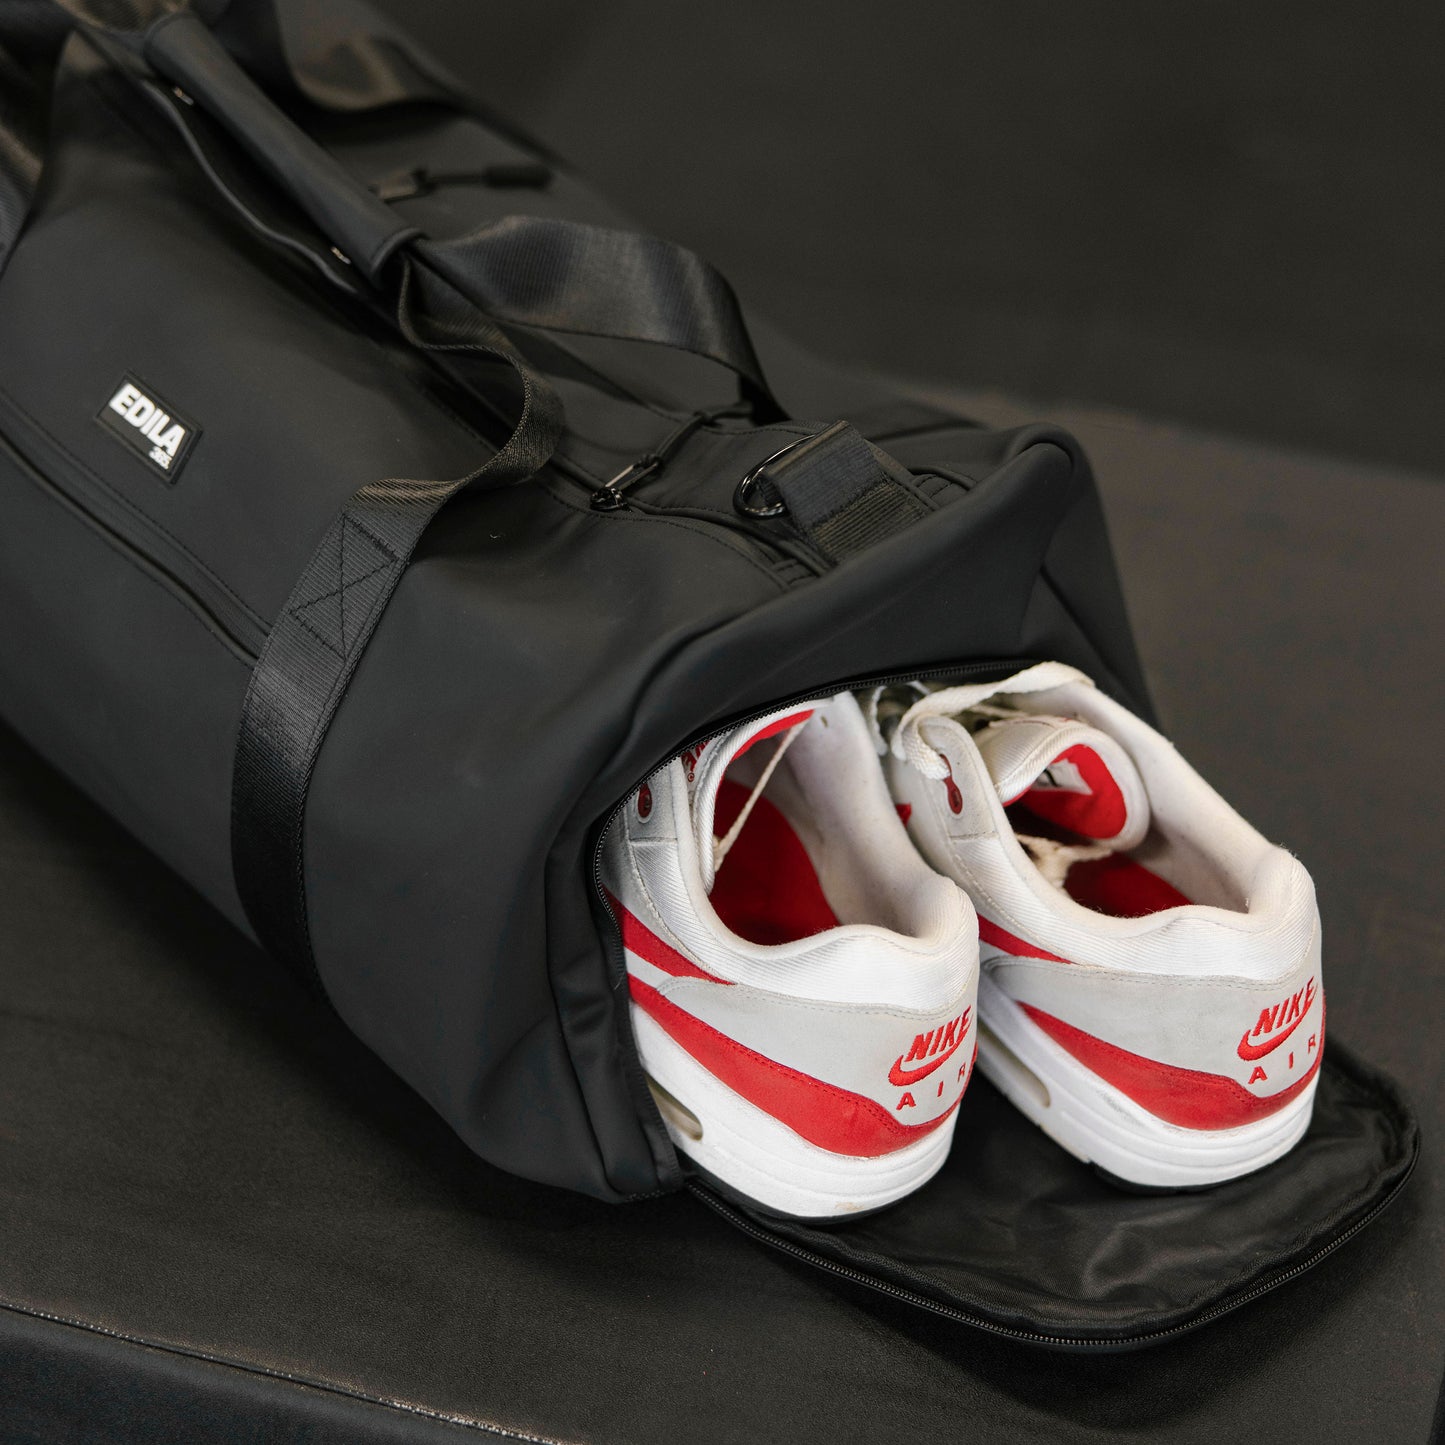 THE ACTIVE BAG